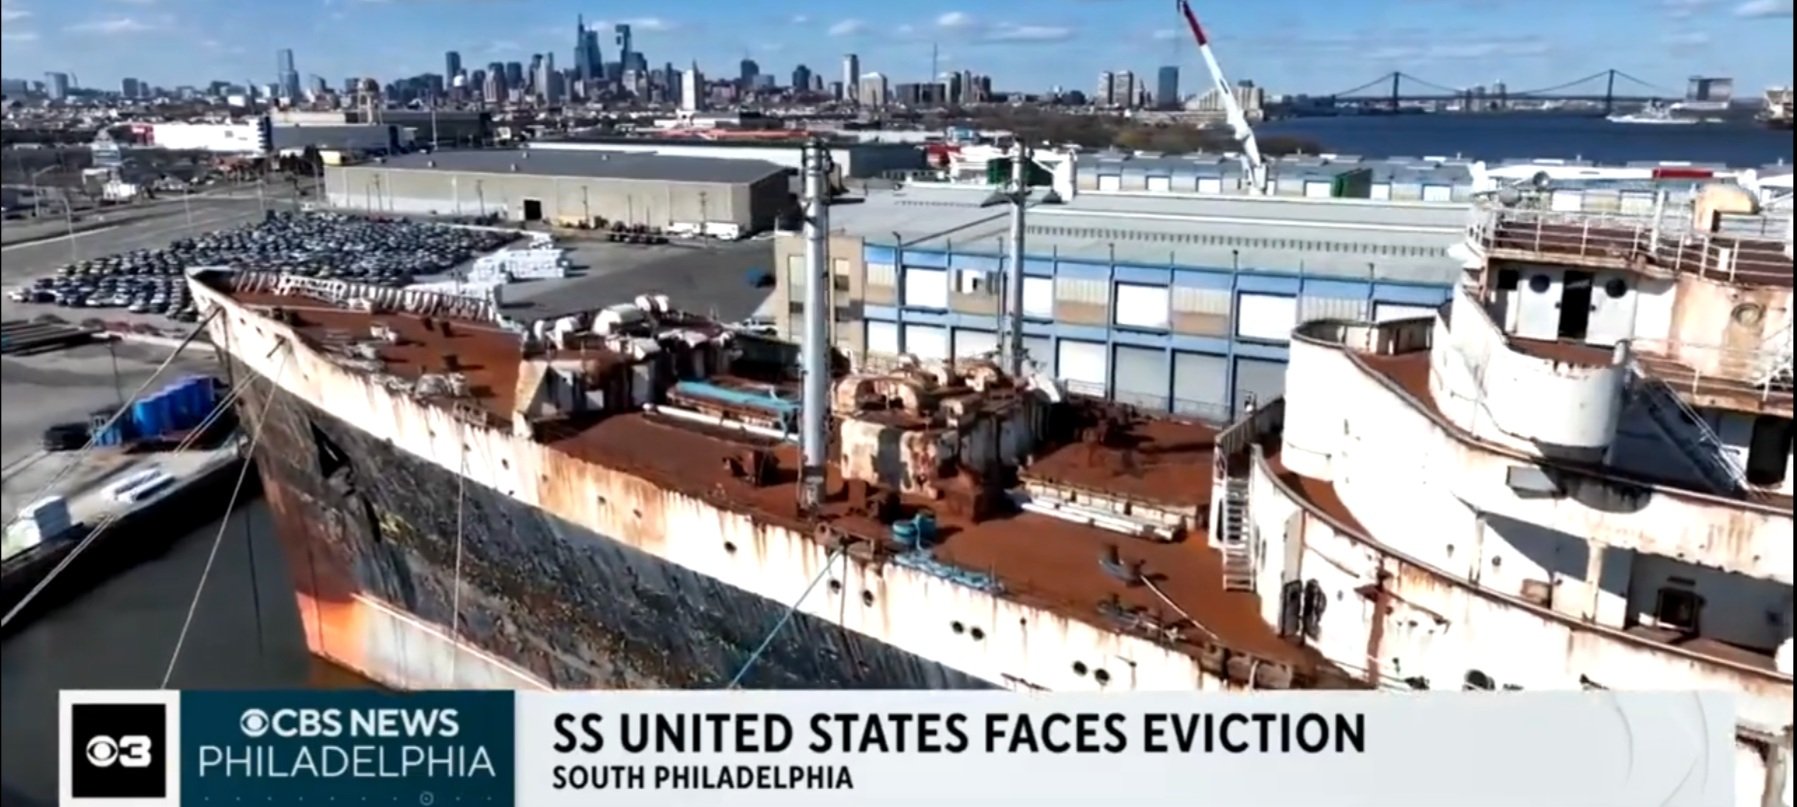 CBS 3: Dispute between SS United States Conservancy and Penn Warehousing has historic ocean liner facing eviction